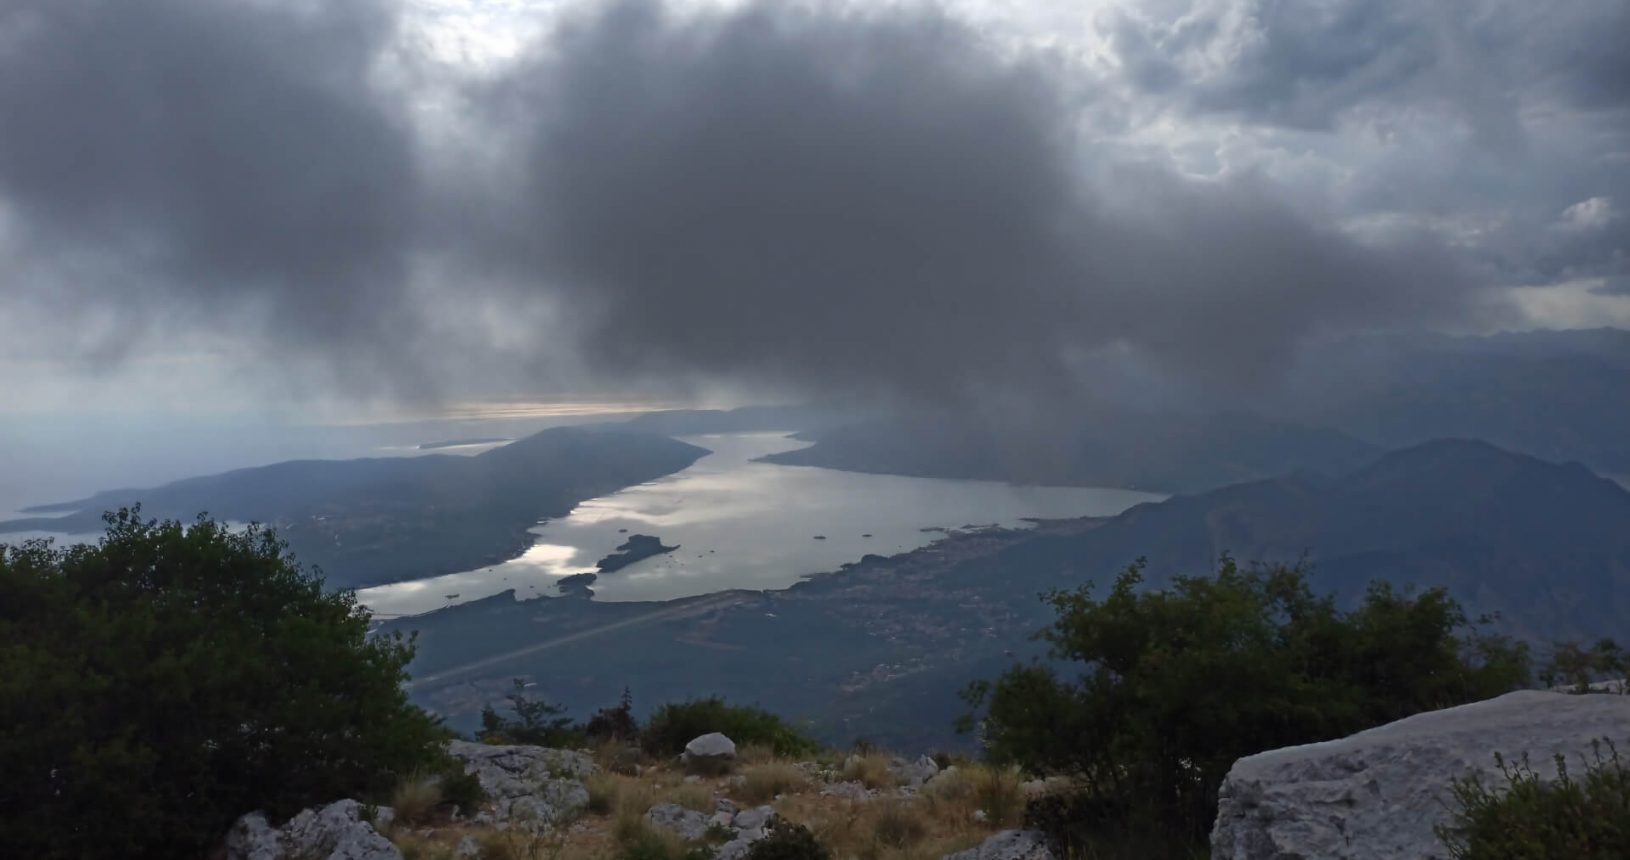 The bay of Kotor of a heart shape. View point for Kotor and Tivat Bay